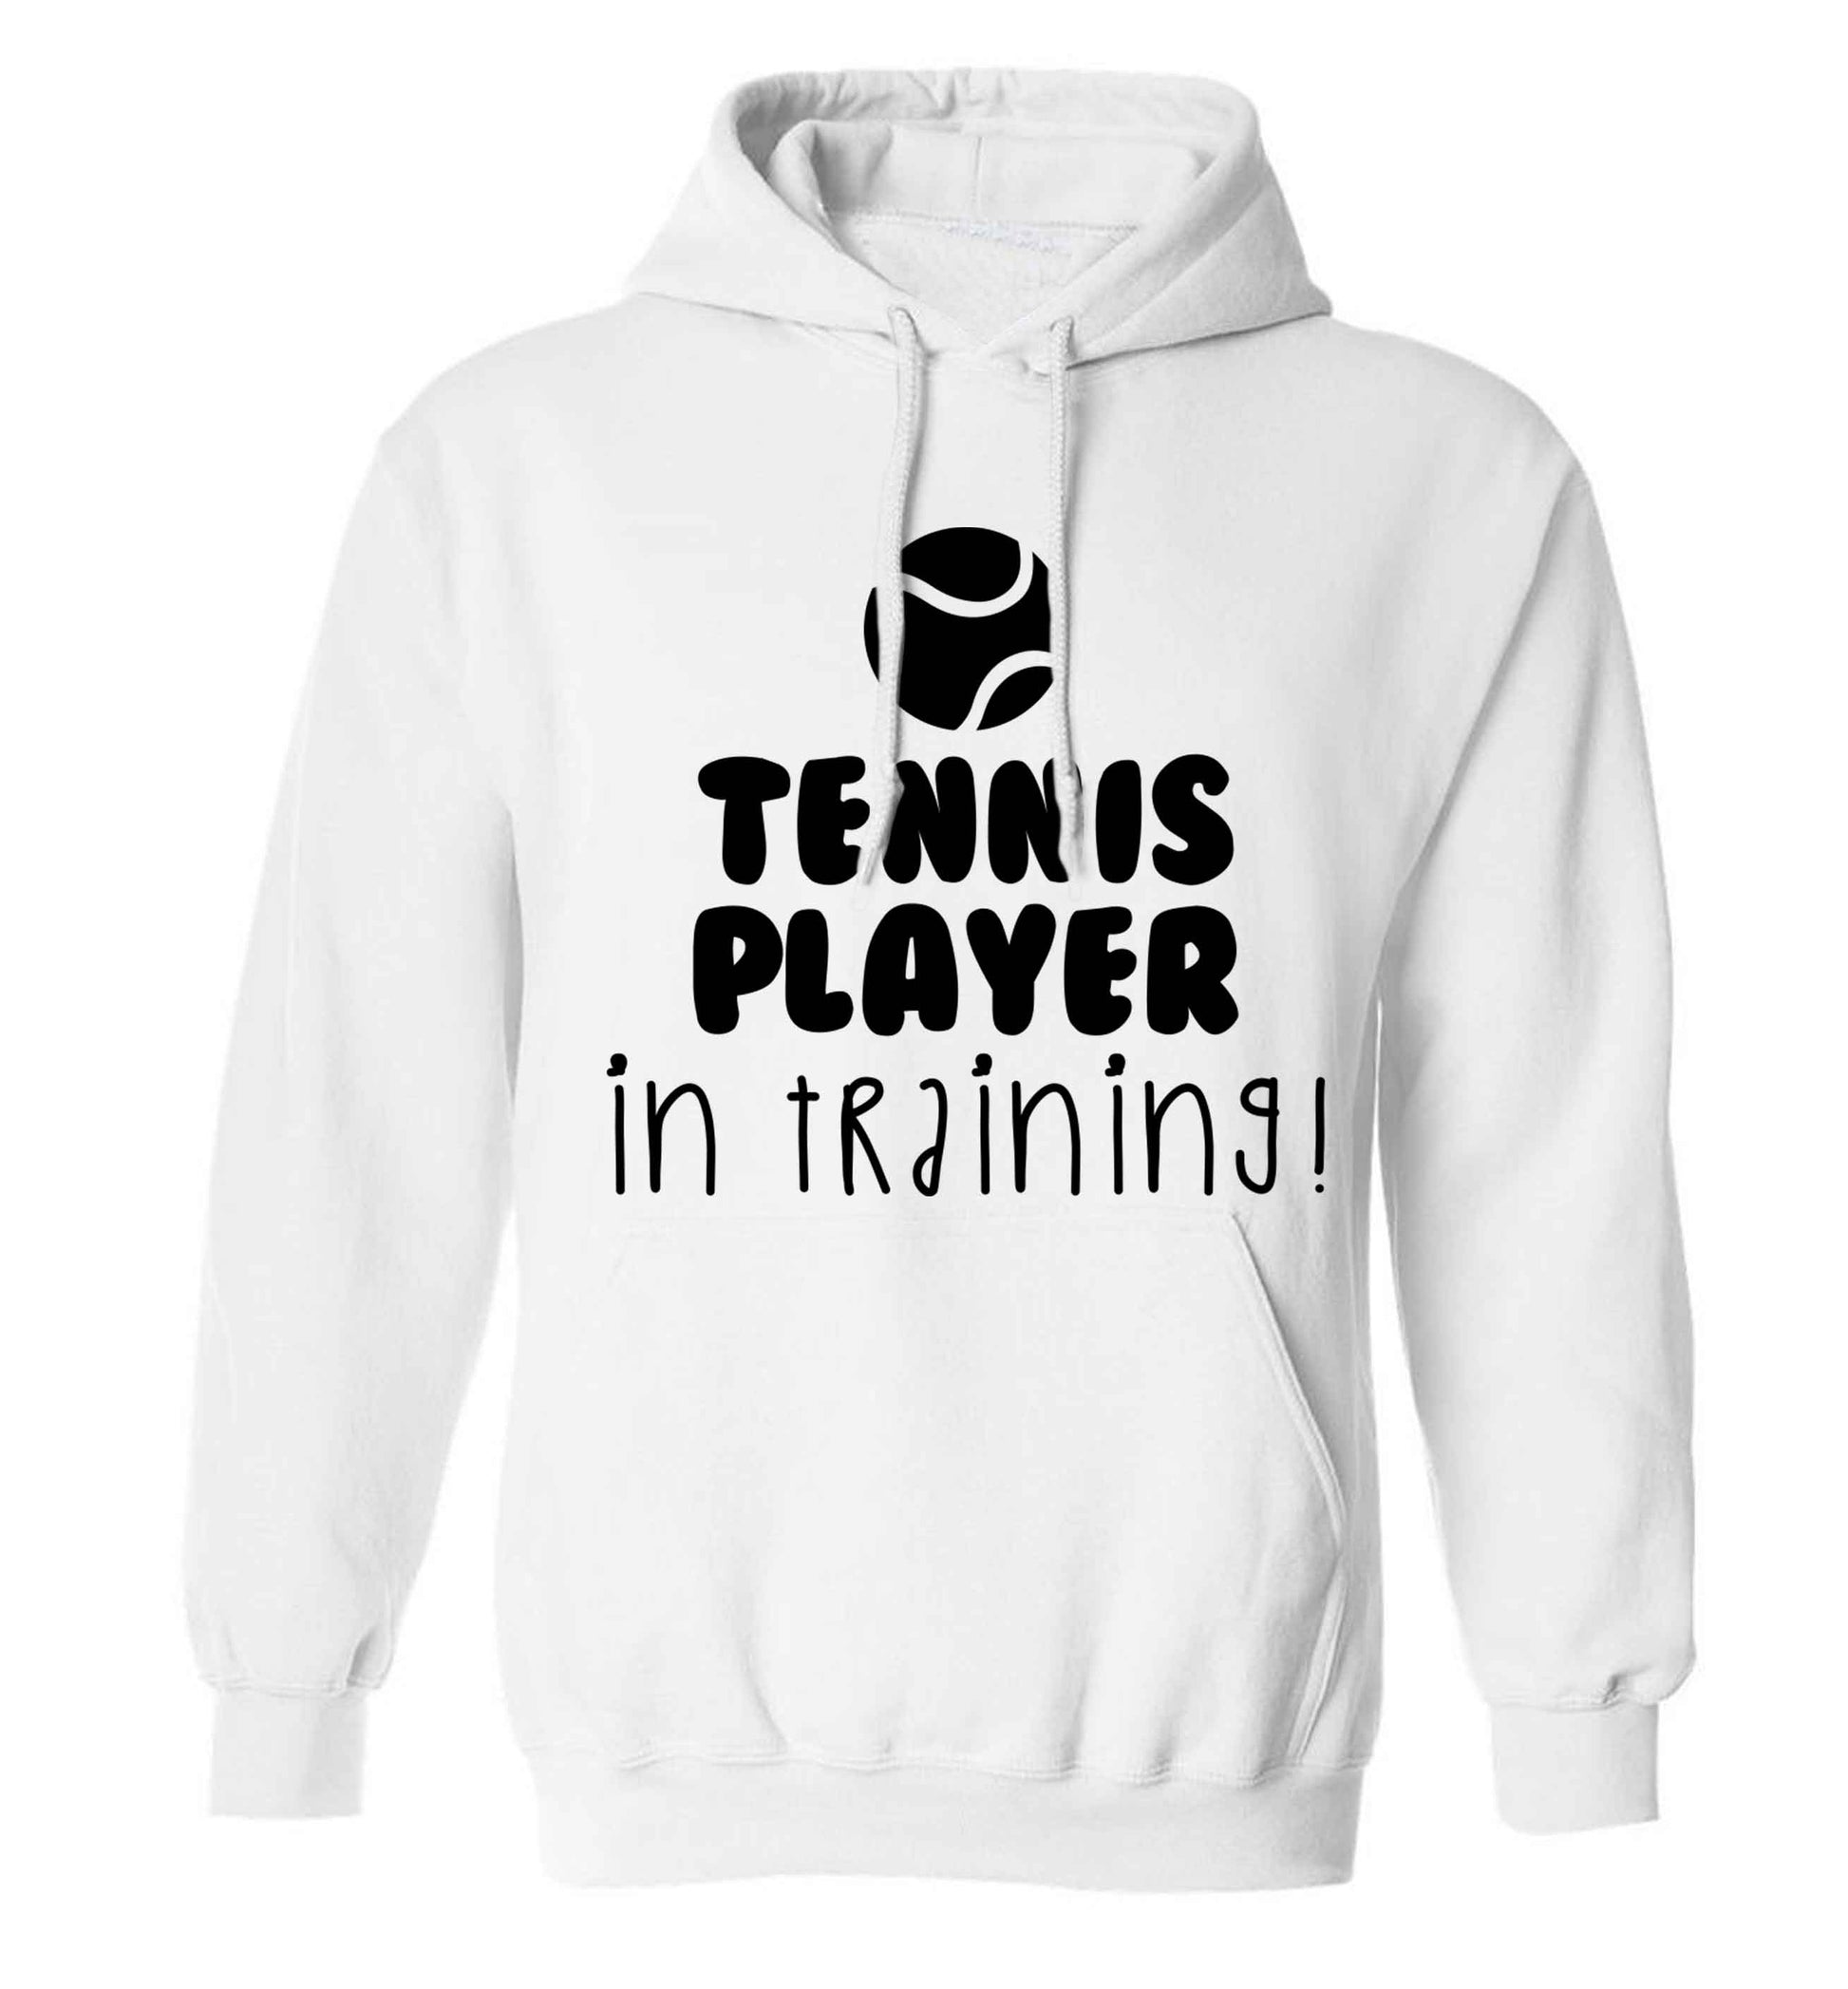 Tennis player in training adults unisex white hoodie 2XL